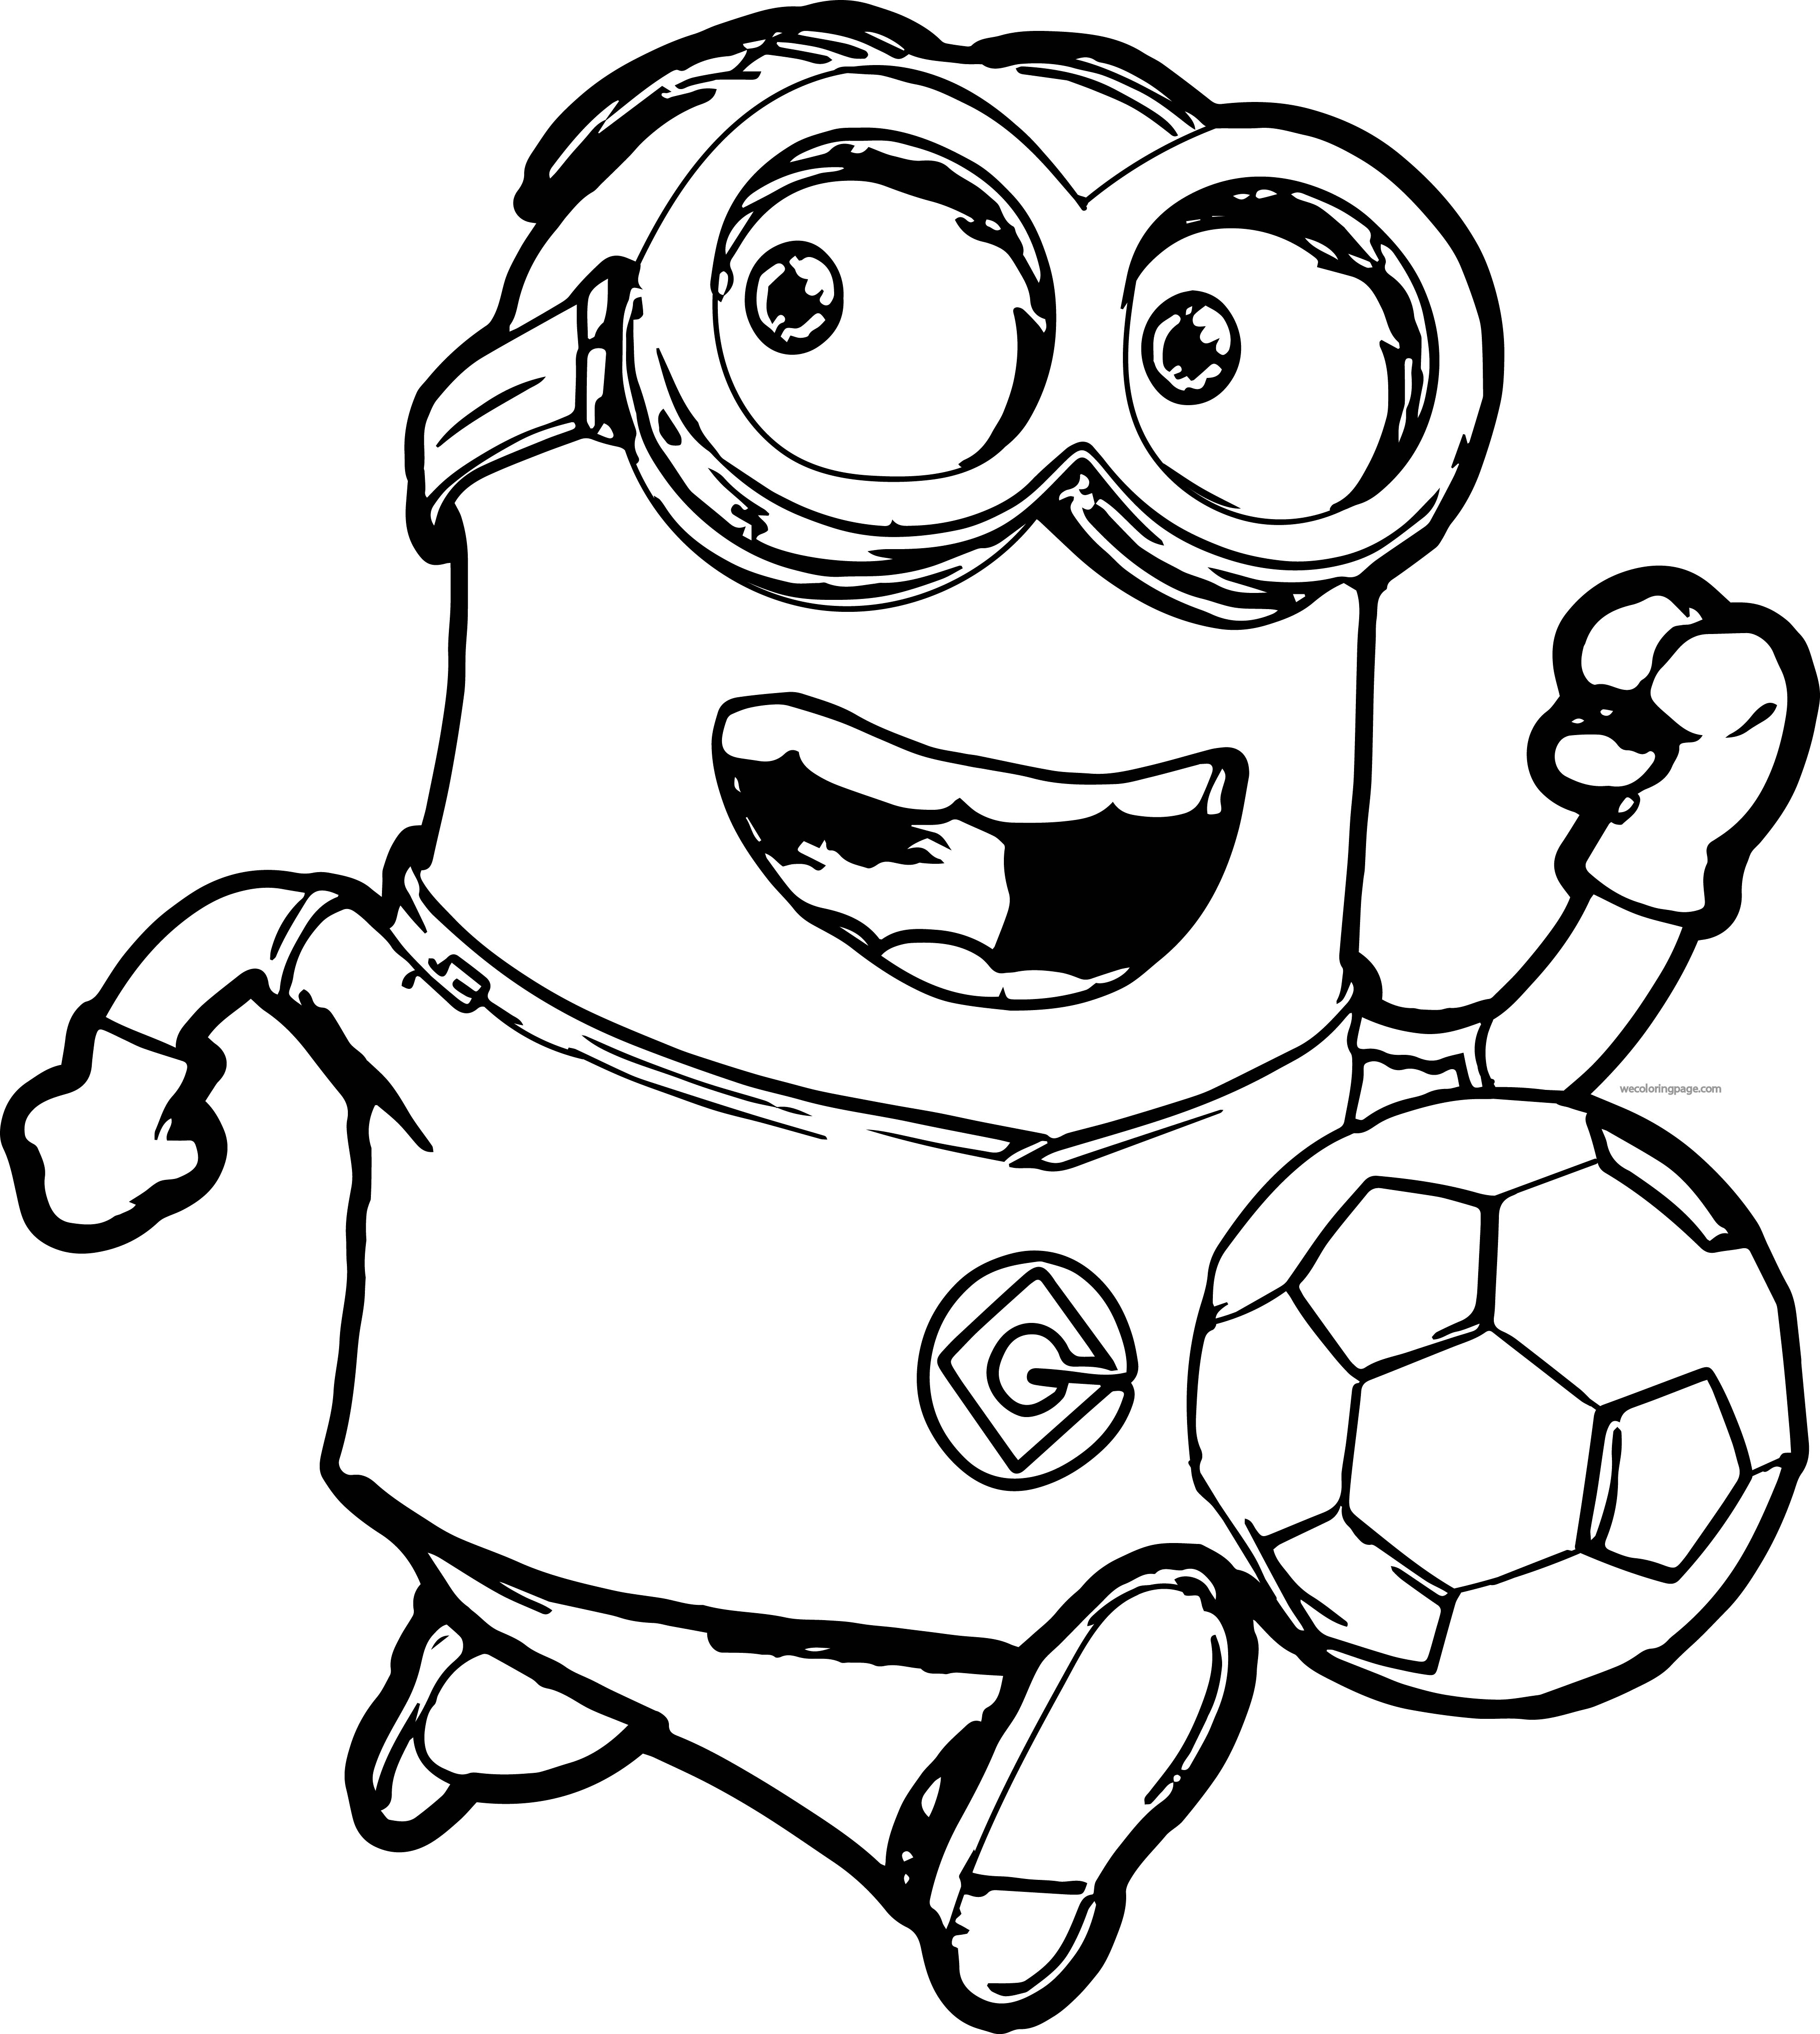 Minion Coloring Pages Best Coloring Pages For Kids HD Wallpapers Download Free Images Wallpaper [wallpaper896.blogspot.com]